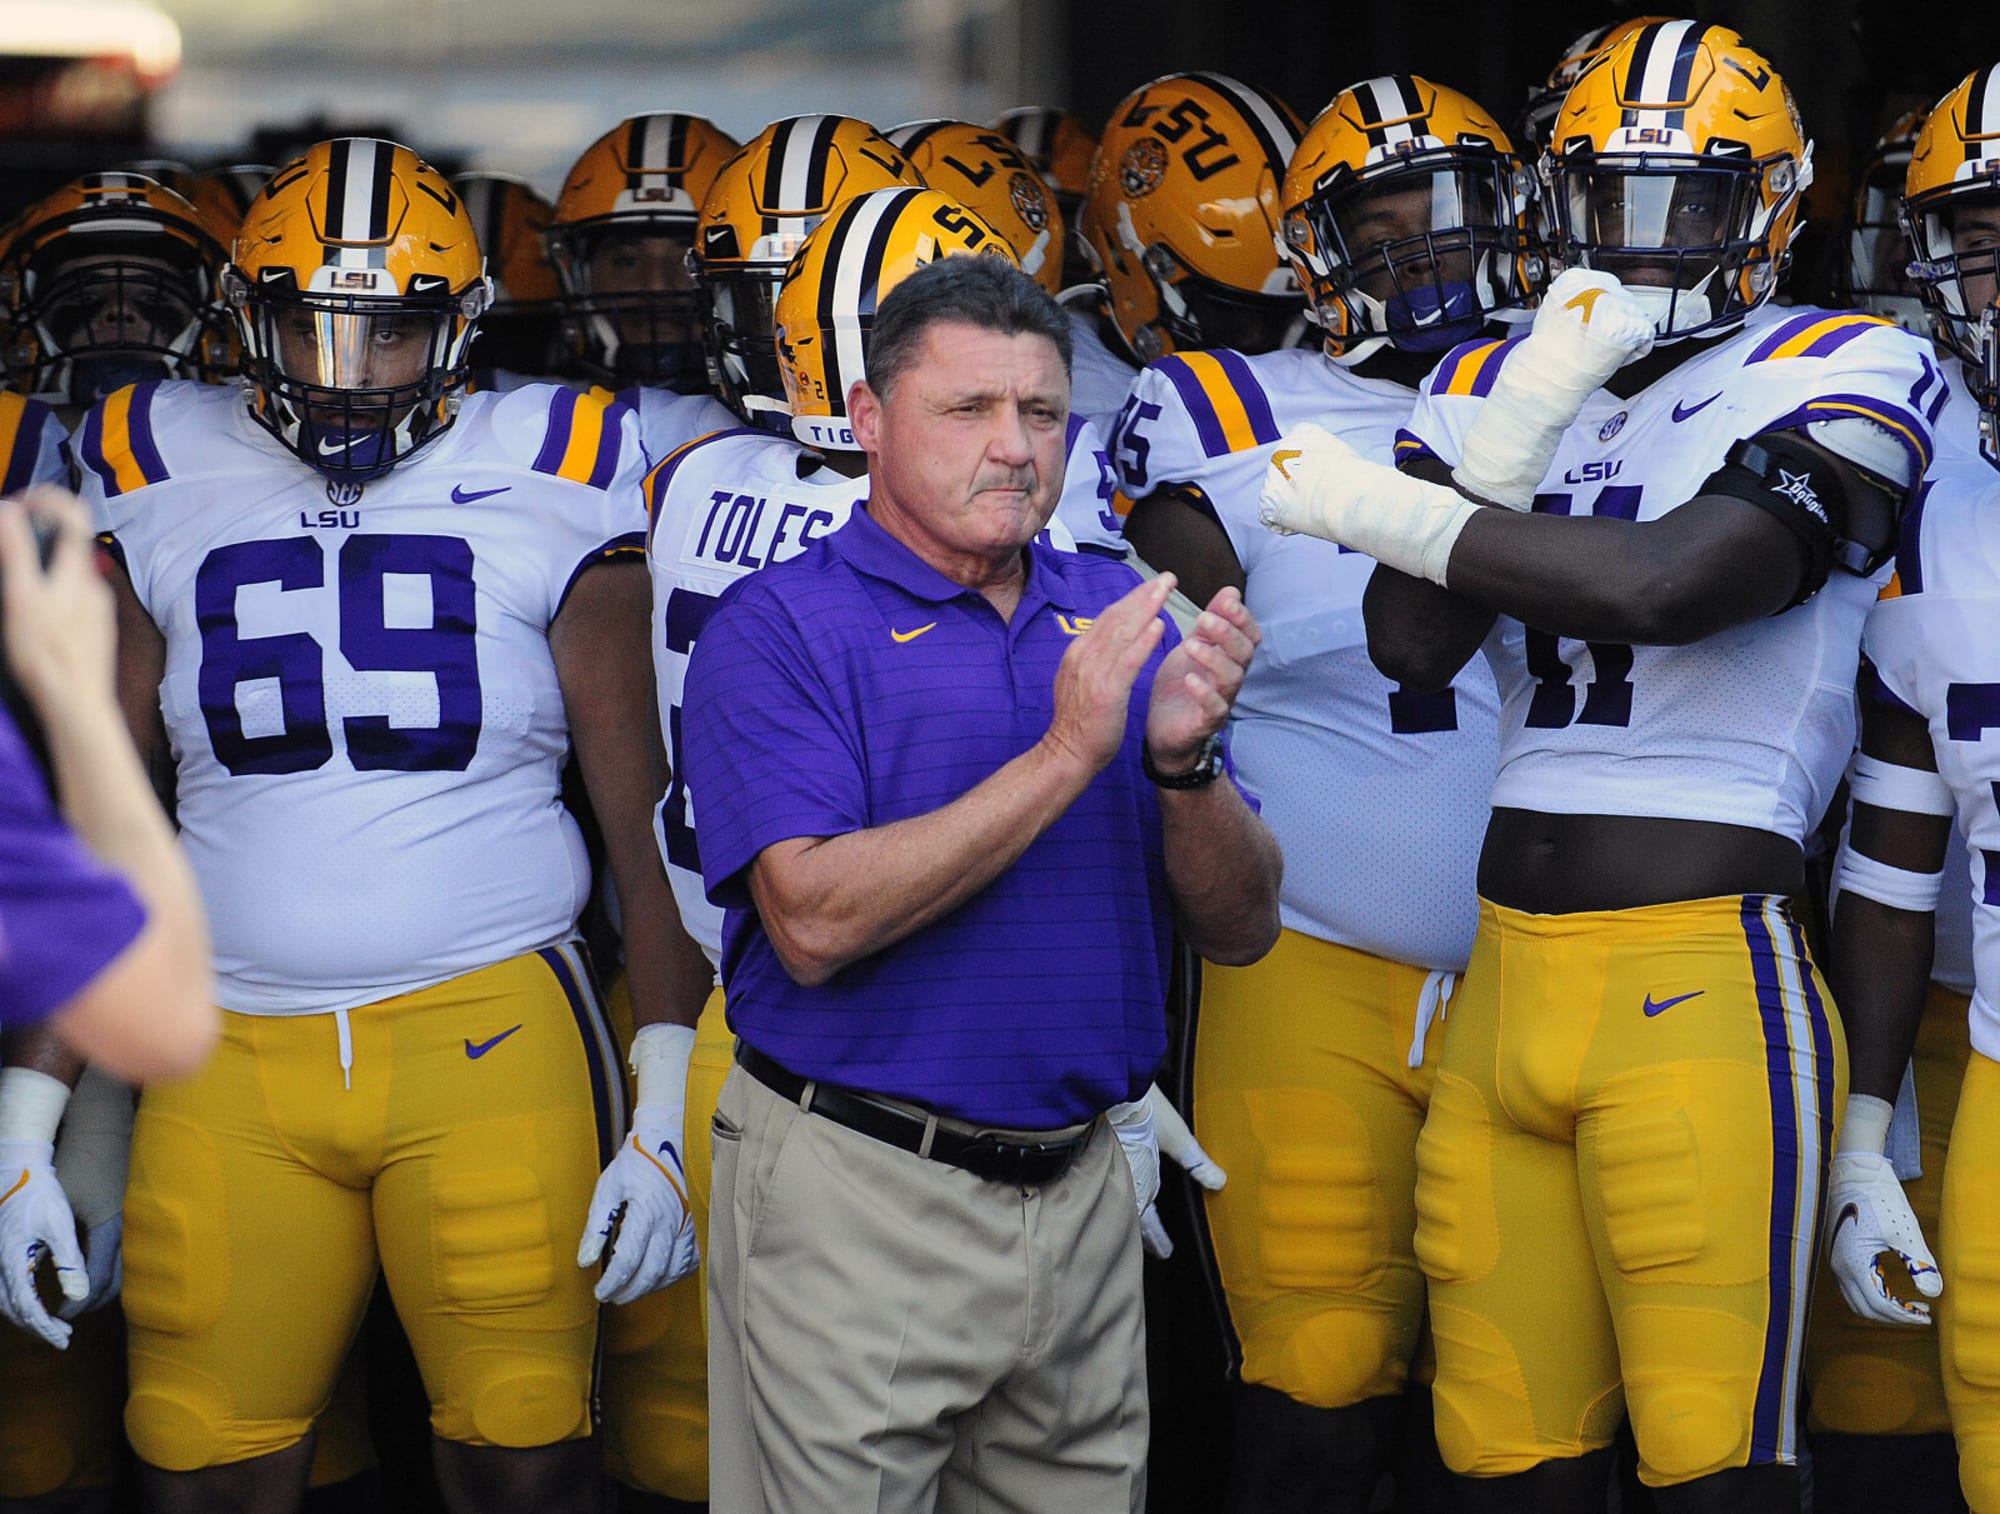 Lsu Football Schedule 2022 2023 2022 Lsu Football Schedule: Complete List Of Tigers Games